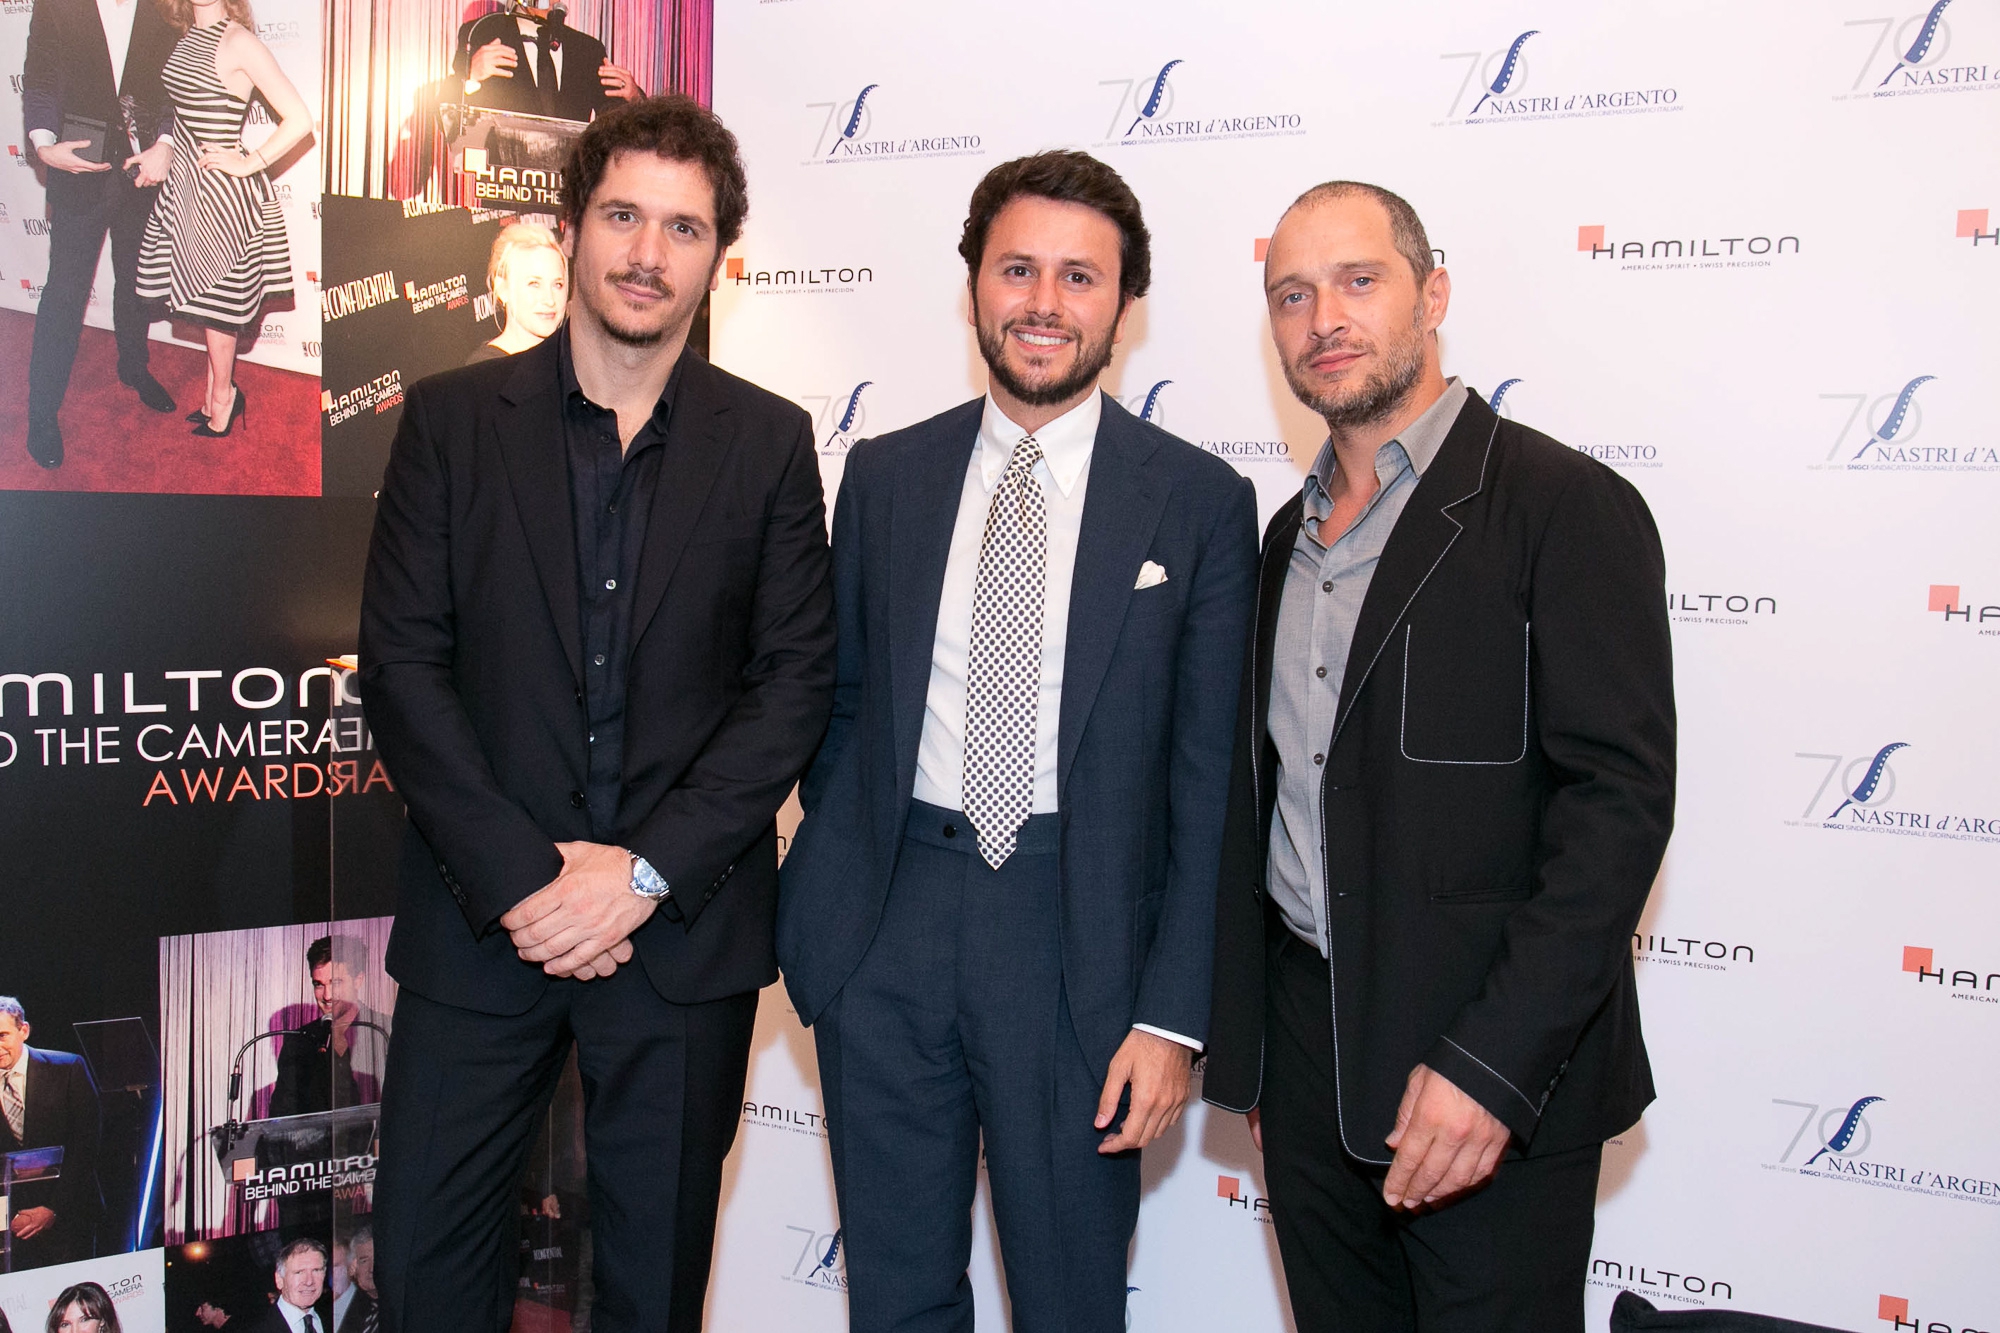 Hamilton Watches & Nastri d'Argento Hamilton strenghtens its bond to the Cinema industry, sponsoring the film festival organised by the Cinema Journalists Union